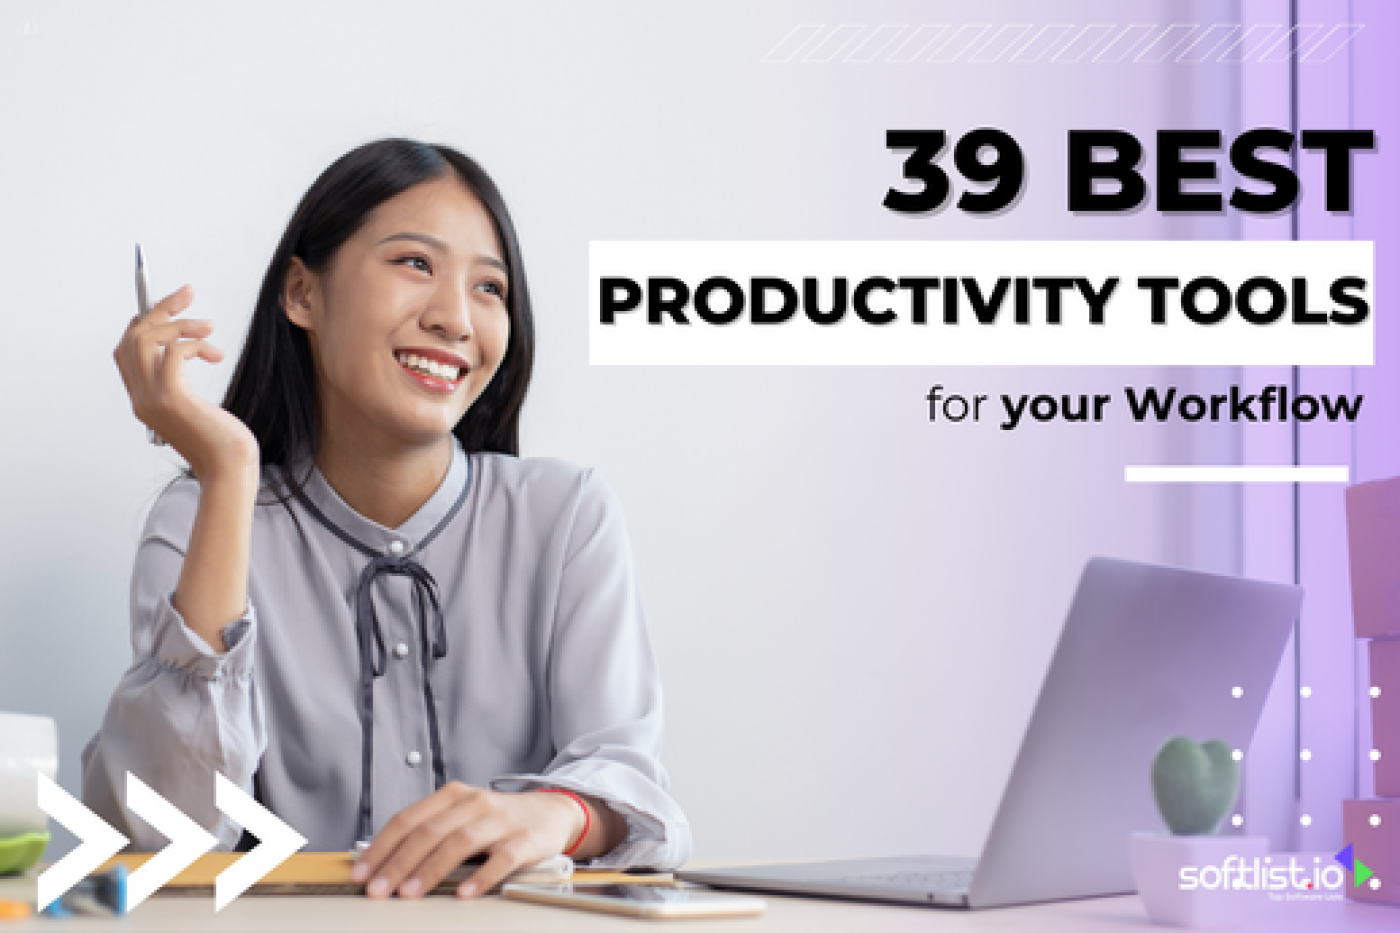 Discover 39 Best Productivity Tools for Your Workflow